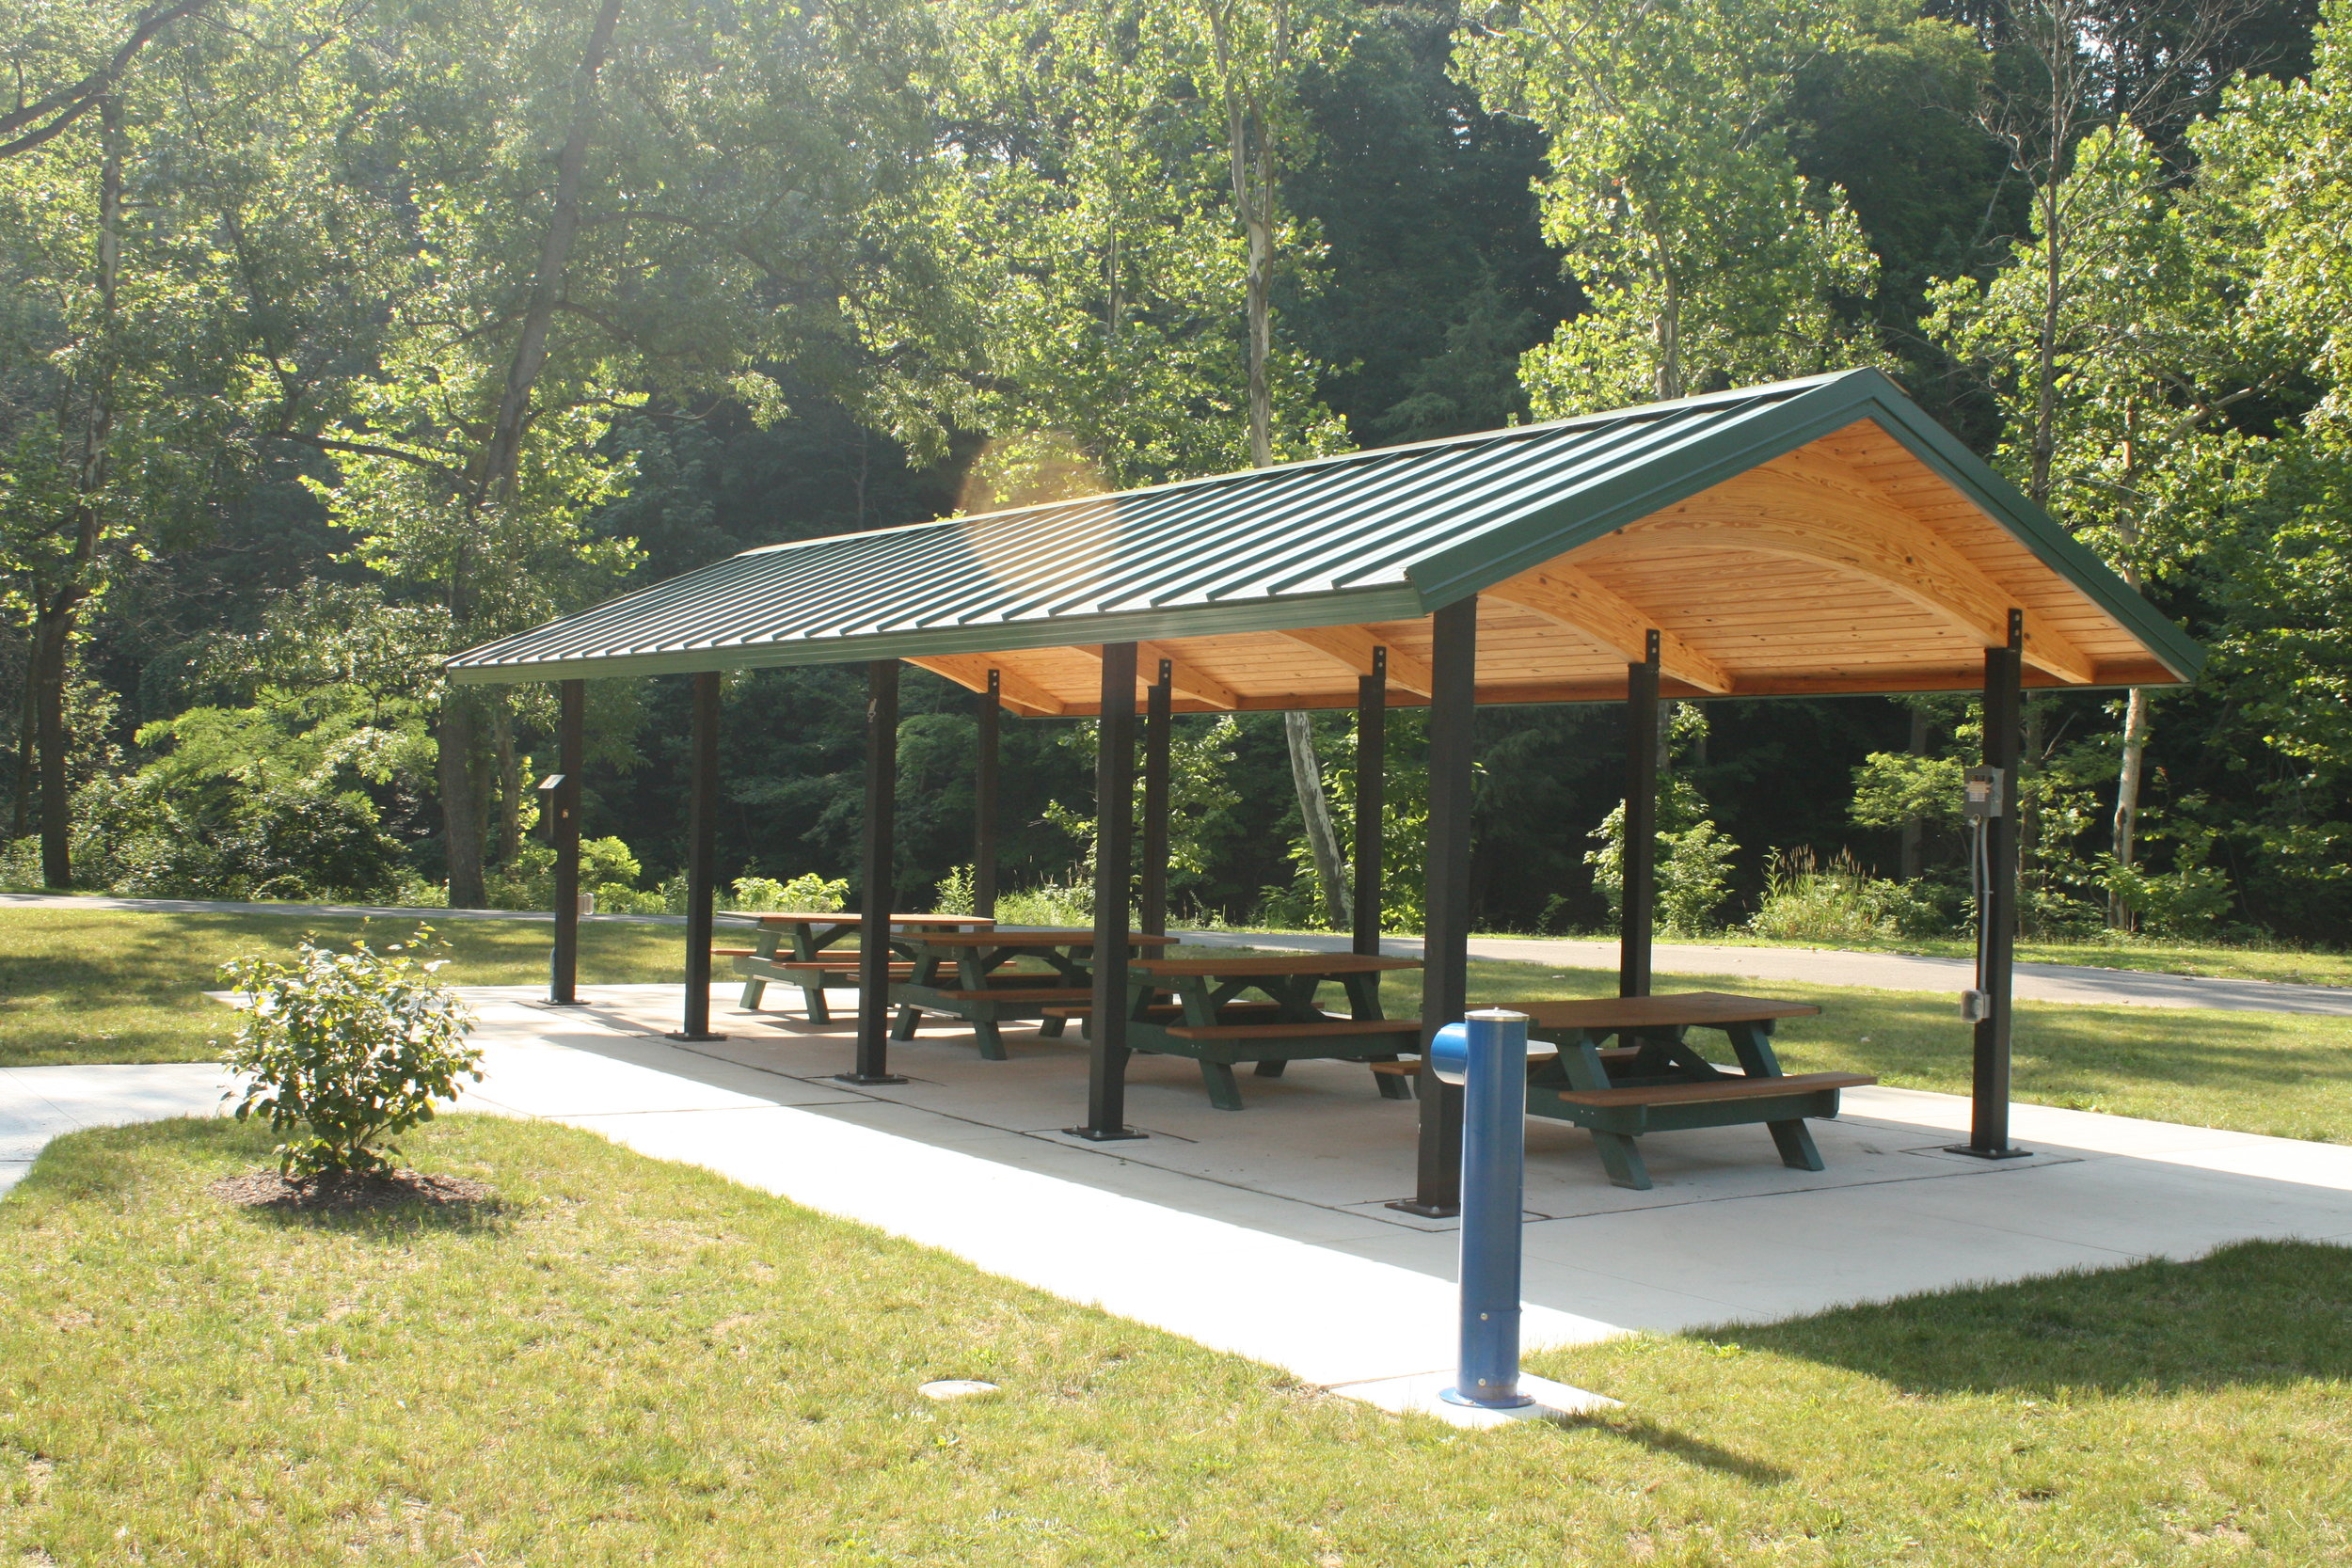 Picnic Shelter located at the 19 Acres Picnic Area